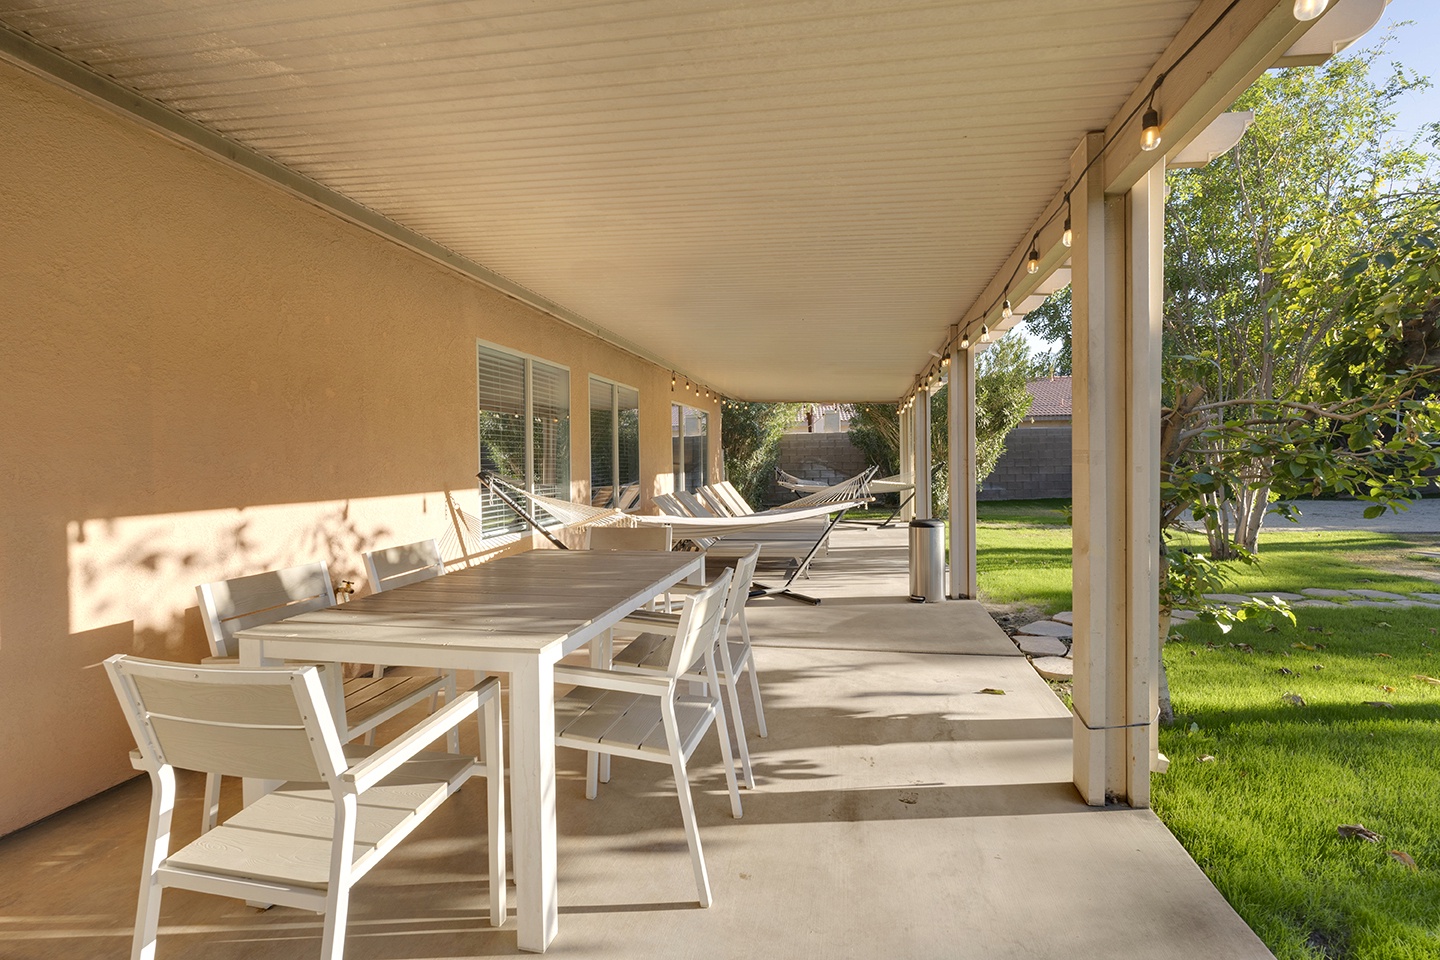 Dine al fresco on the covered patio with gas BBQ grill